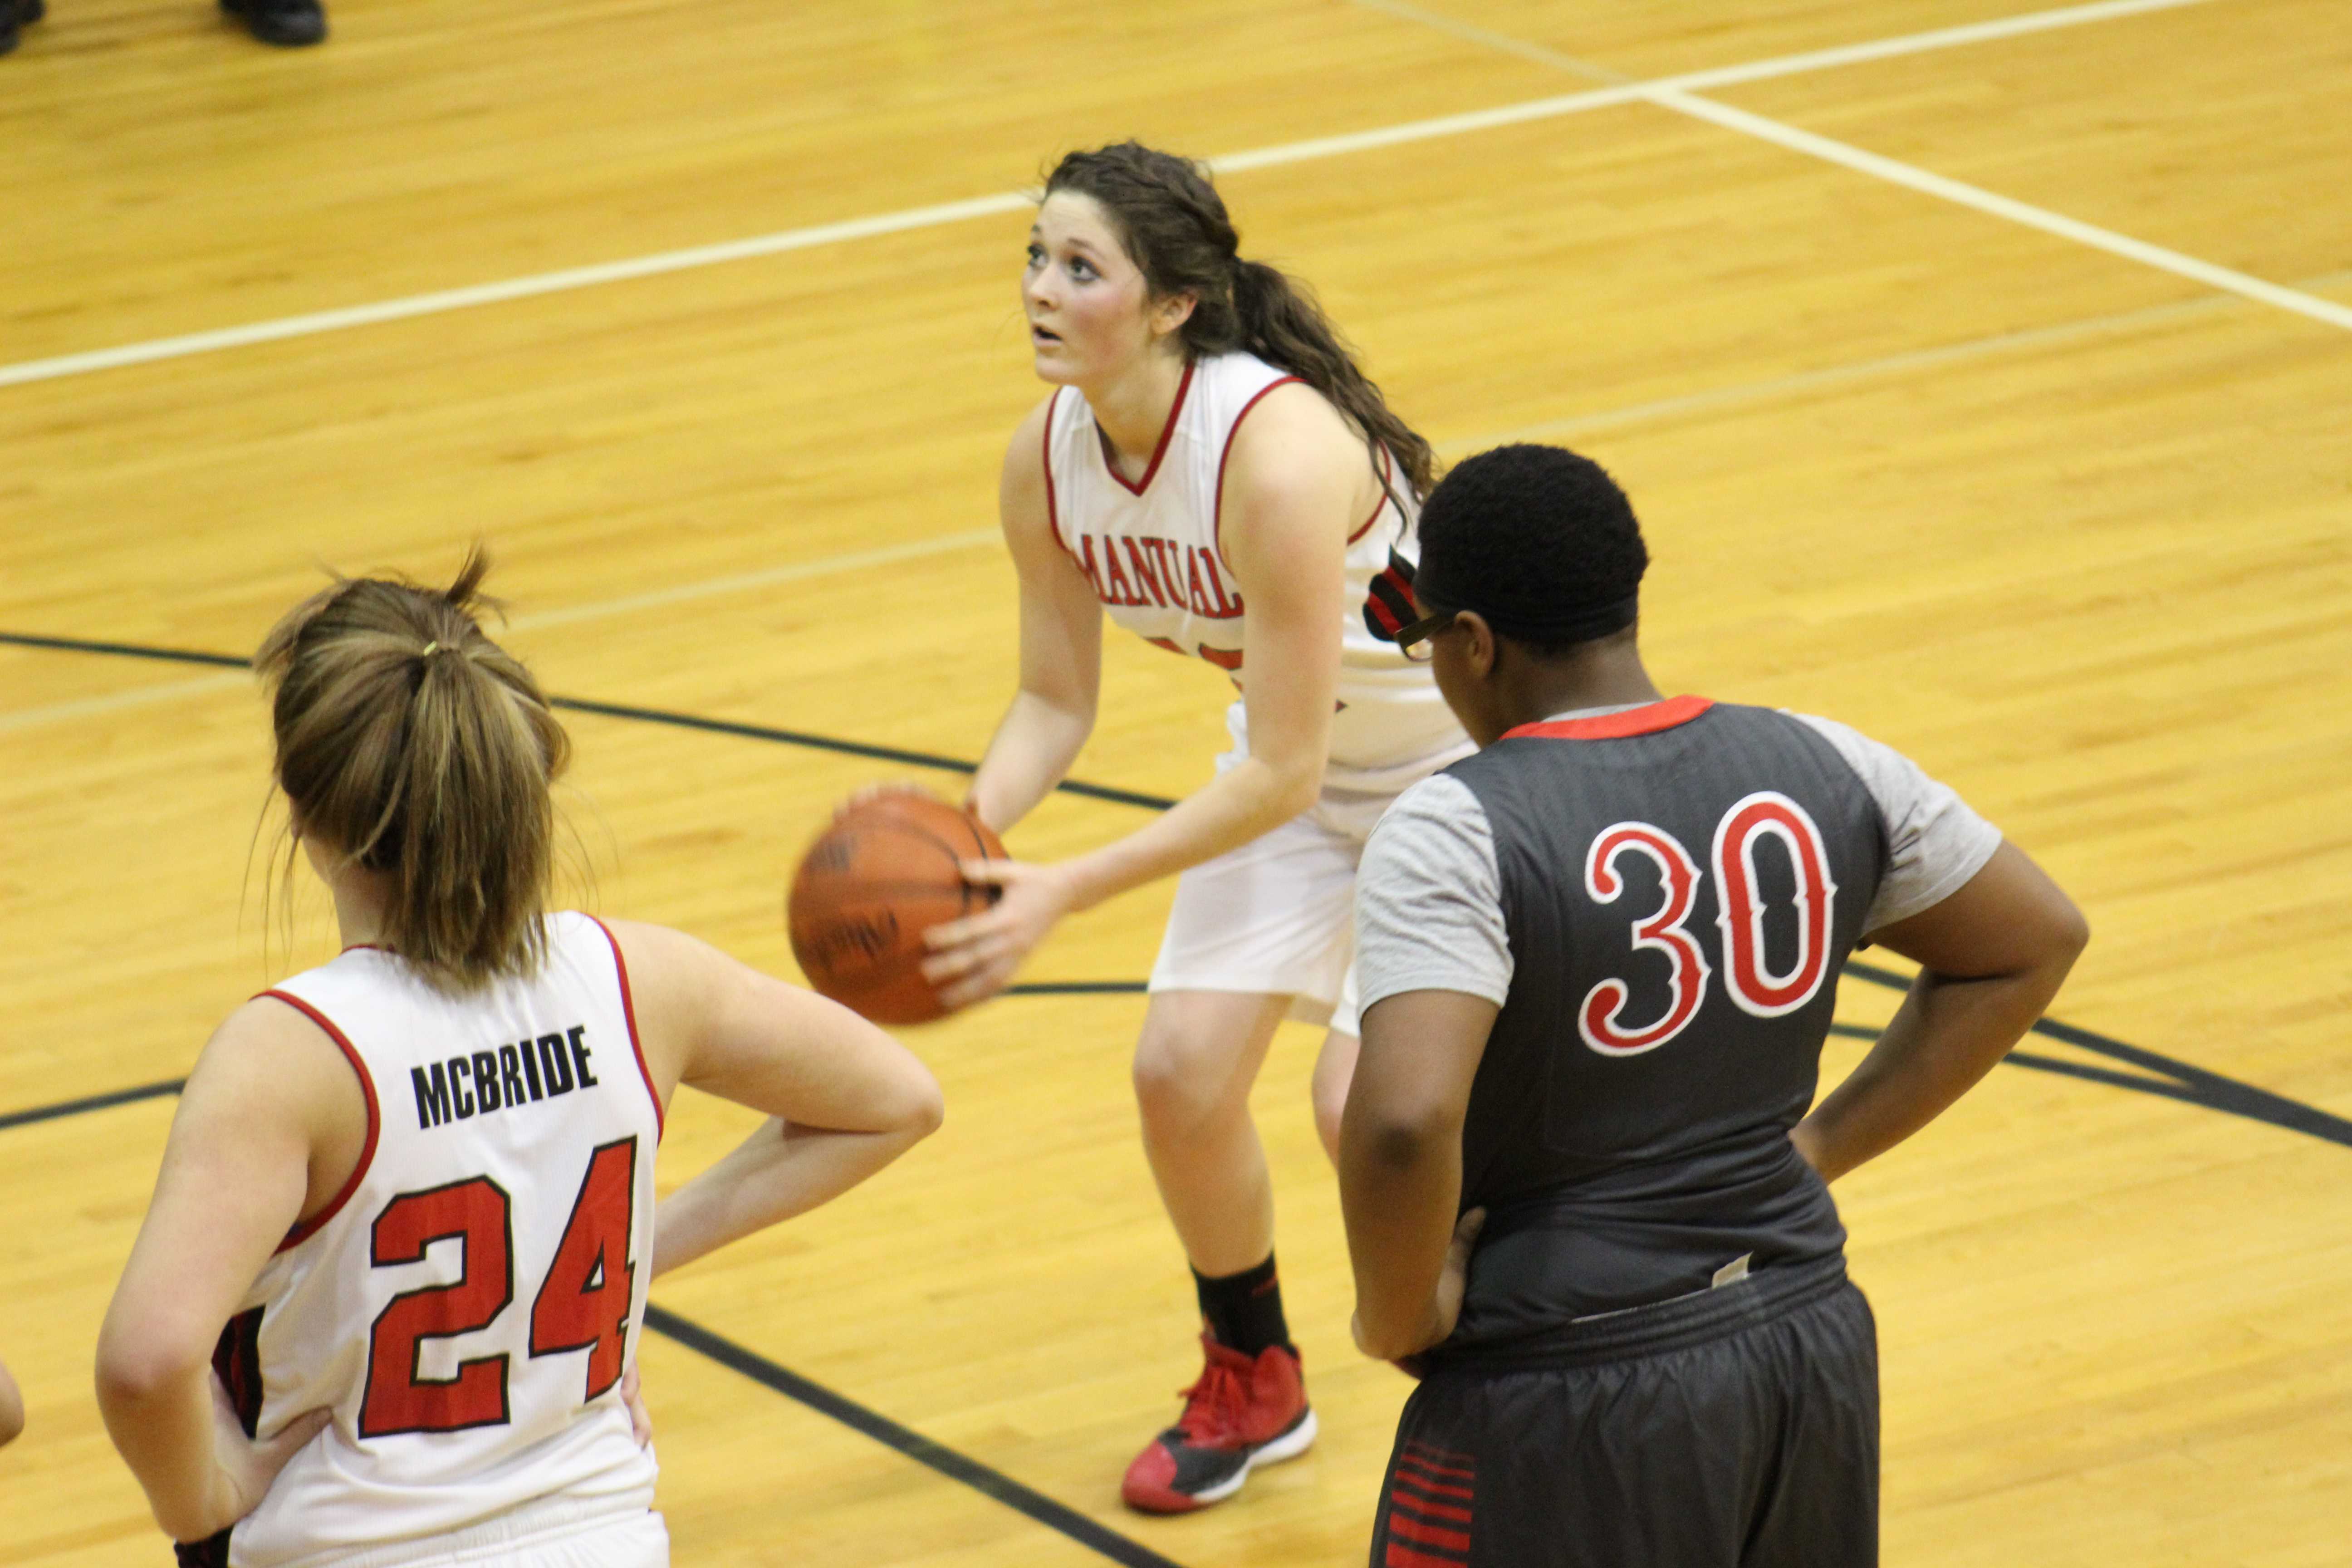 Sydney MacBlane (11, #22)  shoots a free-throw to give the Lady Crimsons a 26 point lead in the third quarter. 